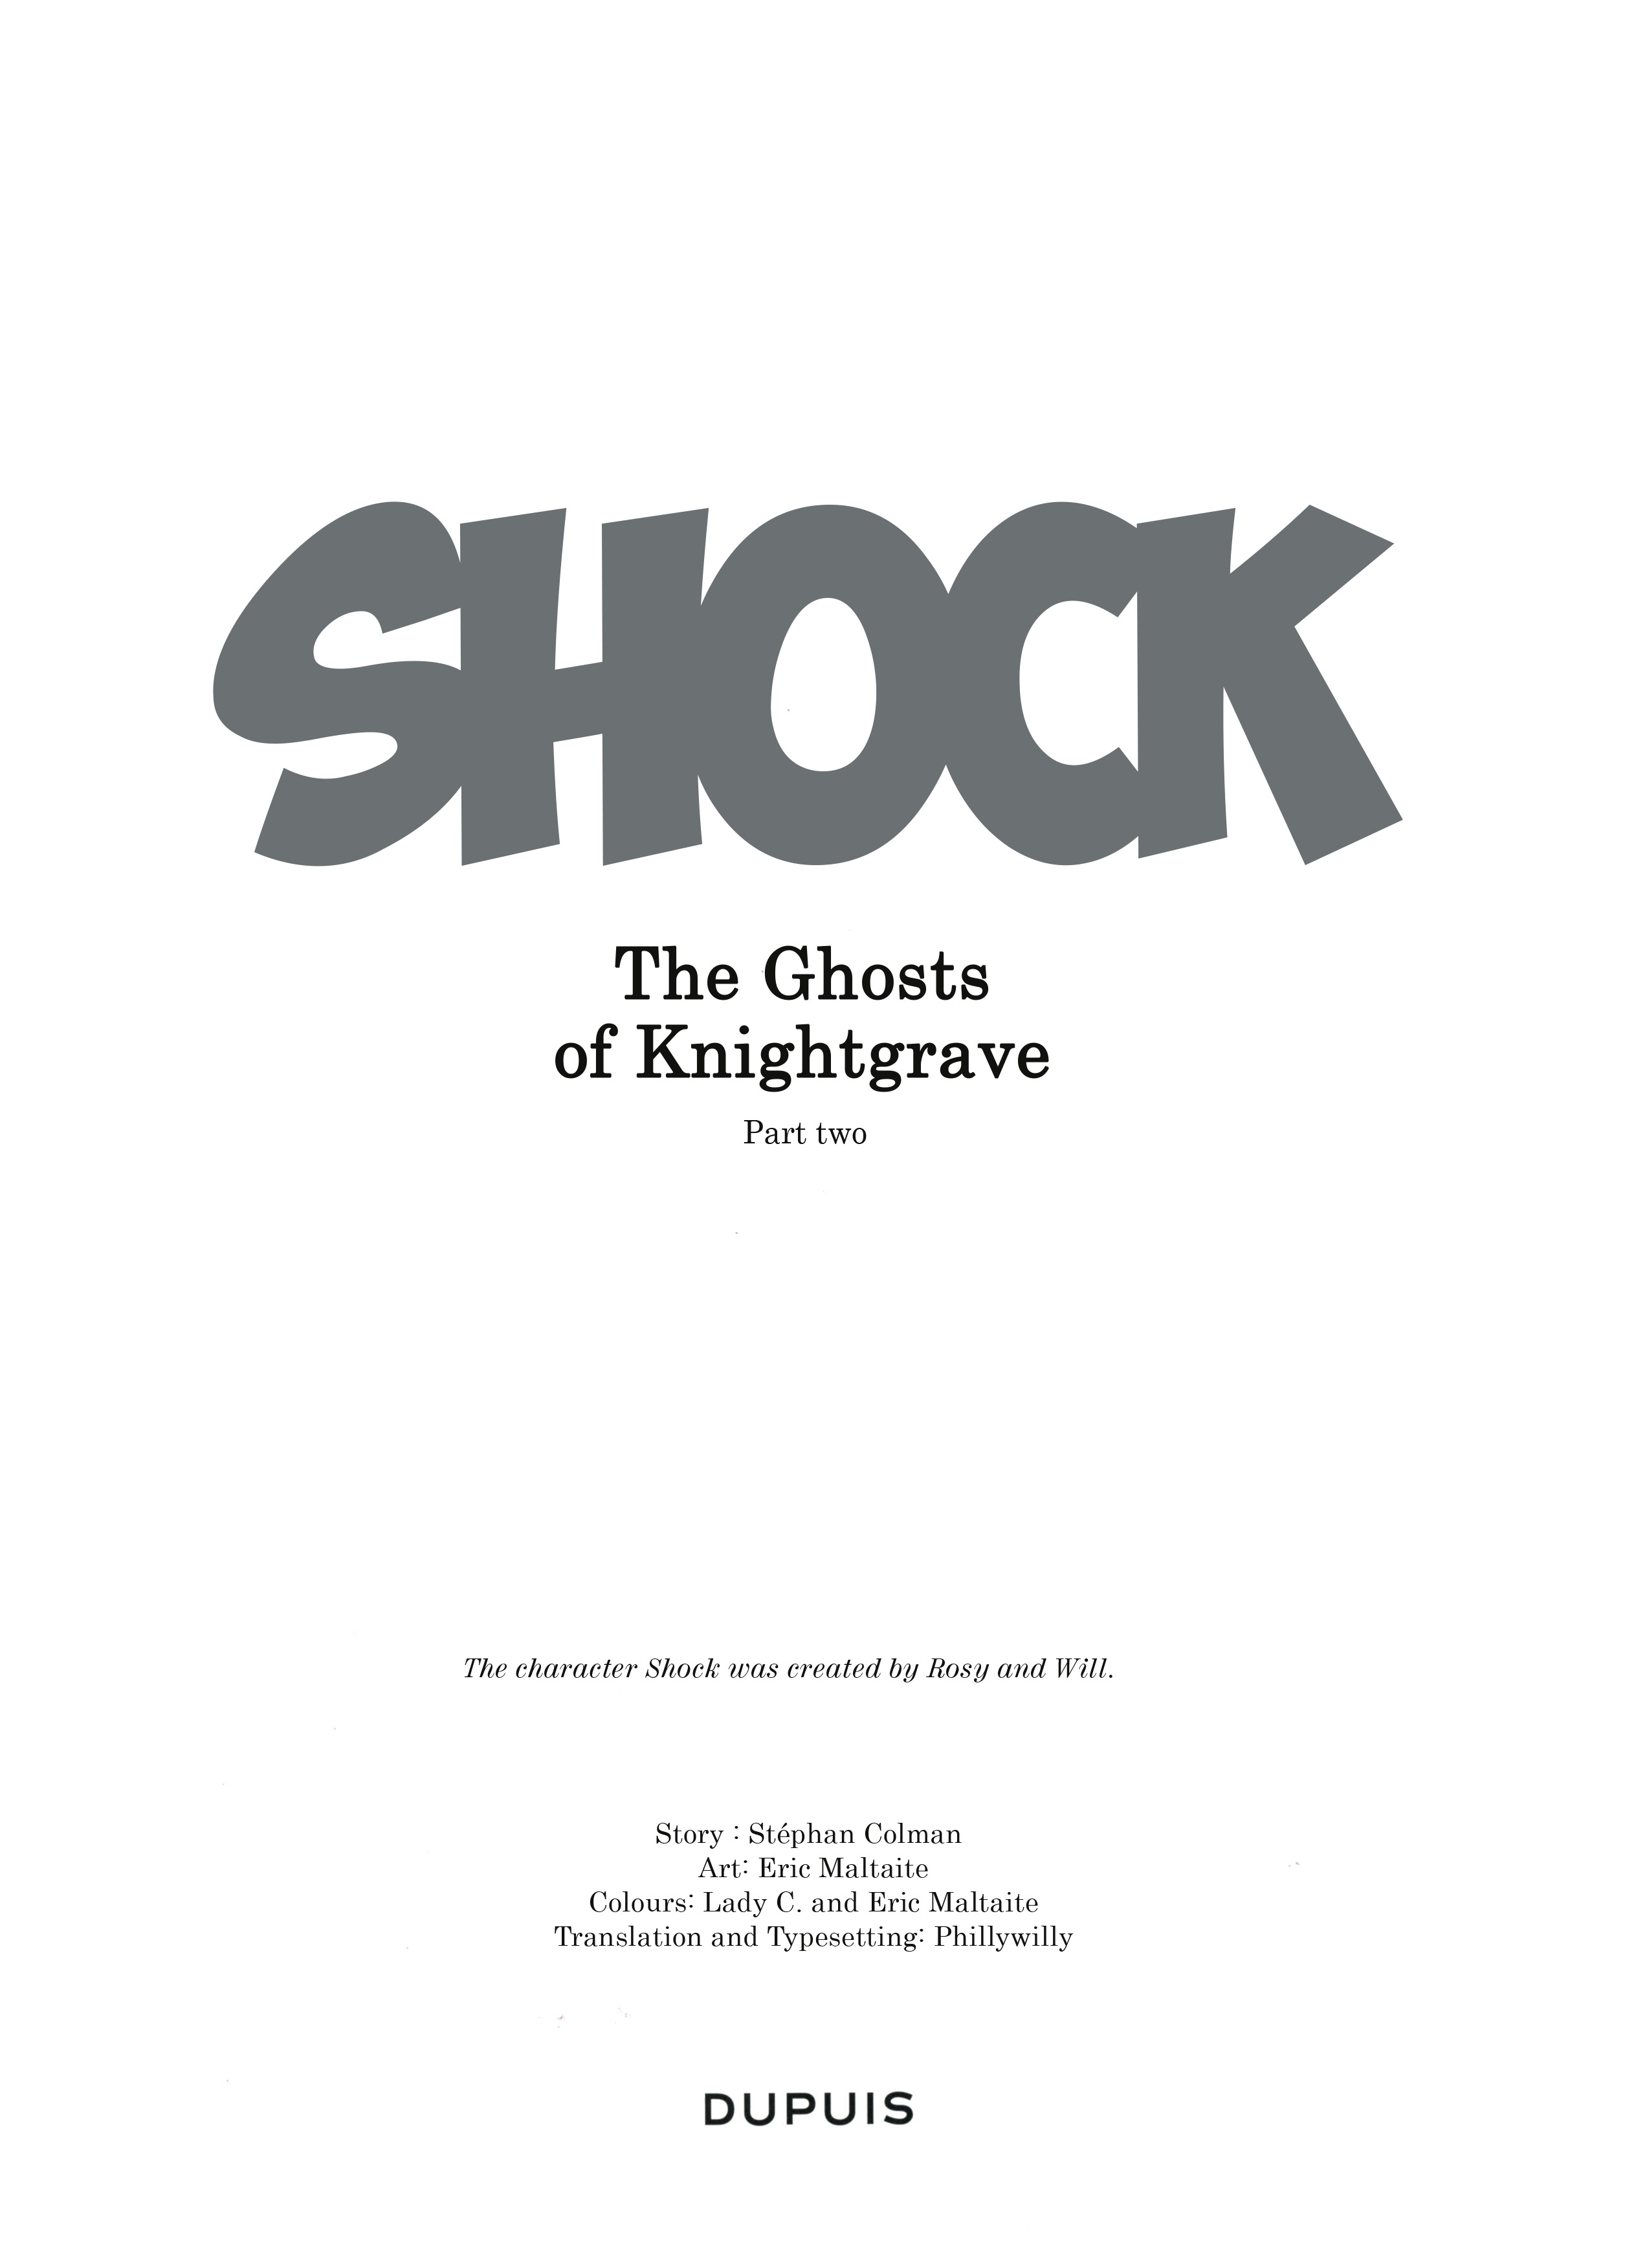 Read online Shock: The Ghosts of Knightgrave comic -  Issue # TPB 2 - 3